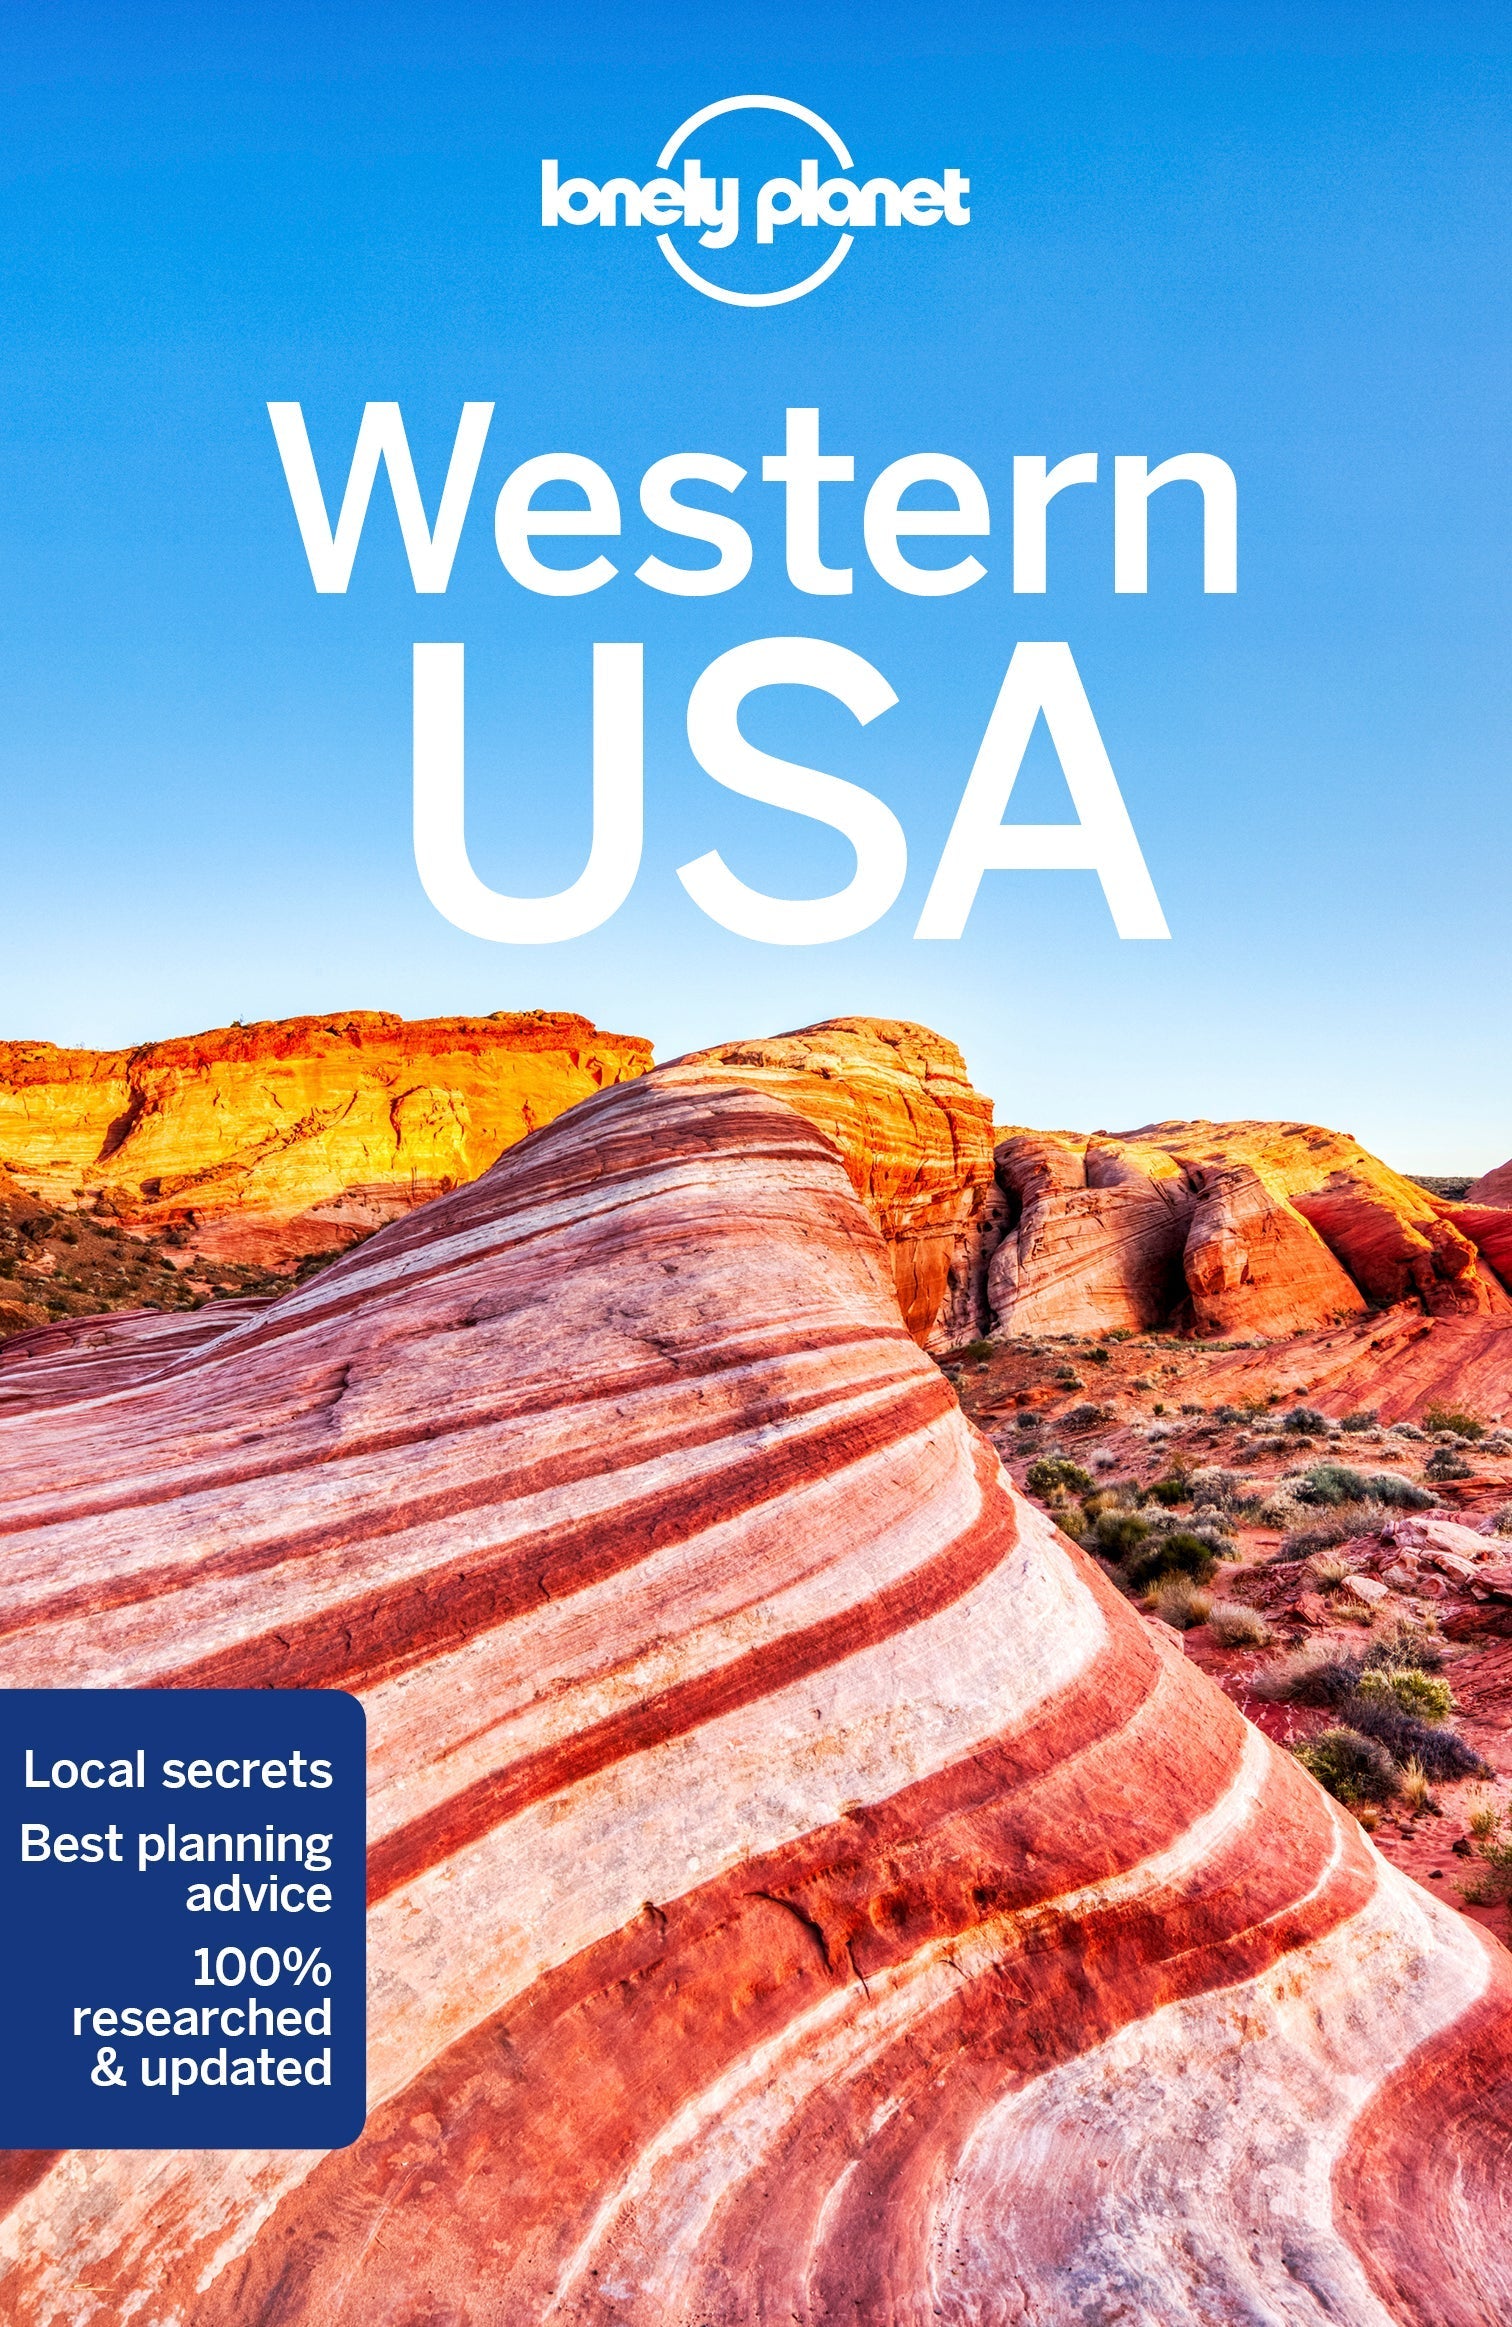 and　Travel　Western　Book　USA　Ebook